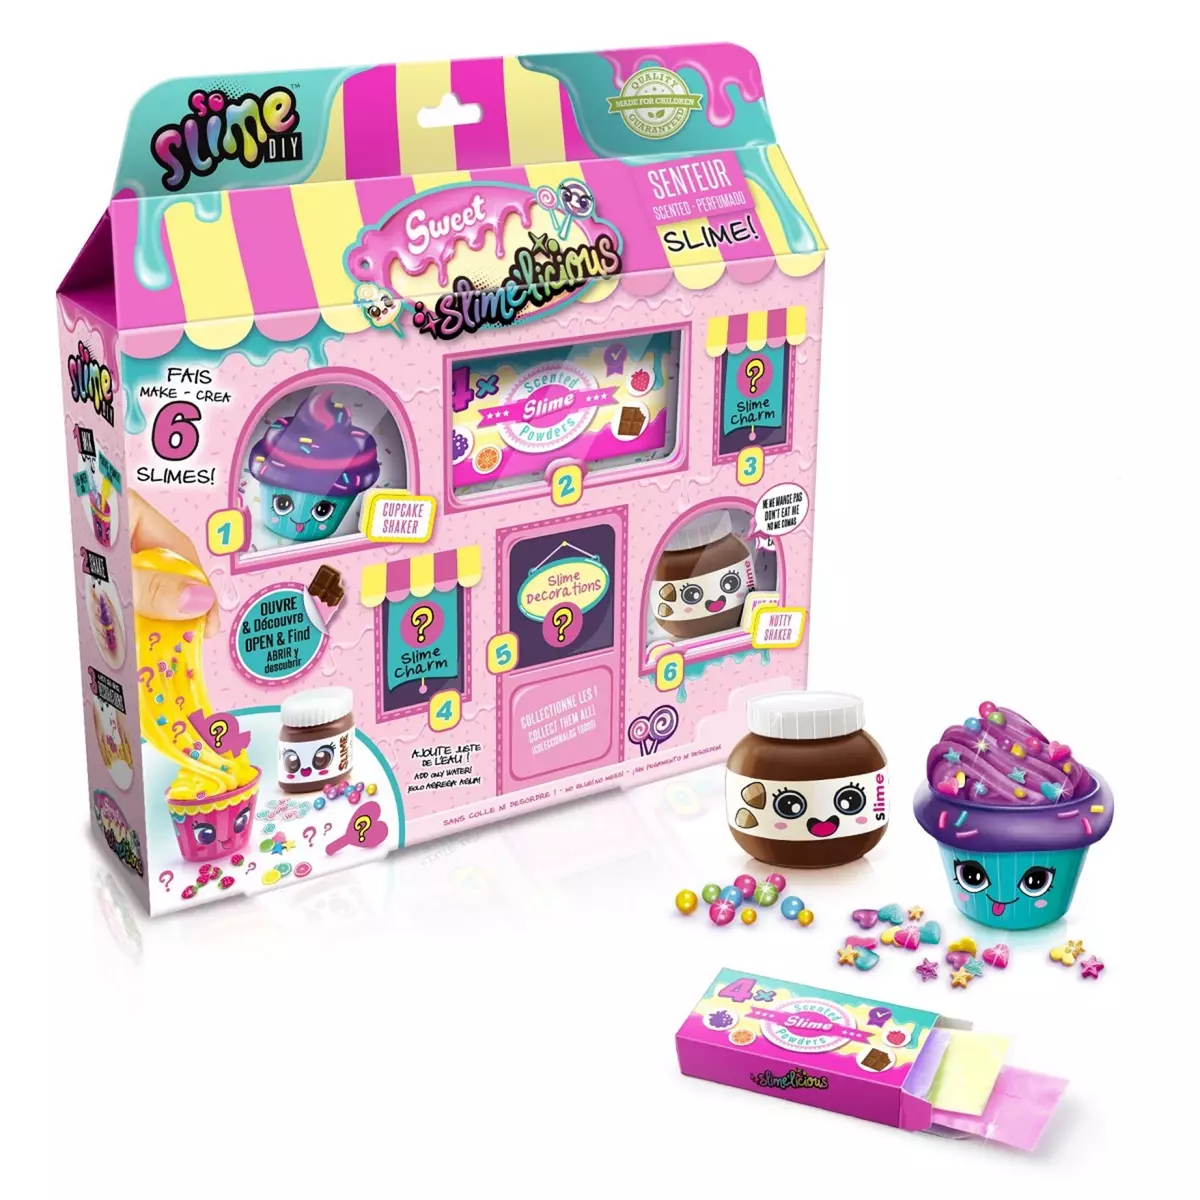 CANAL TOYS Slimelicious - Sweat shop